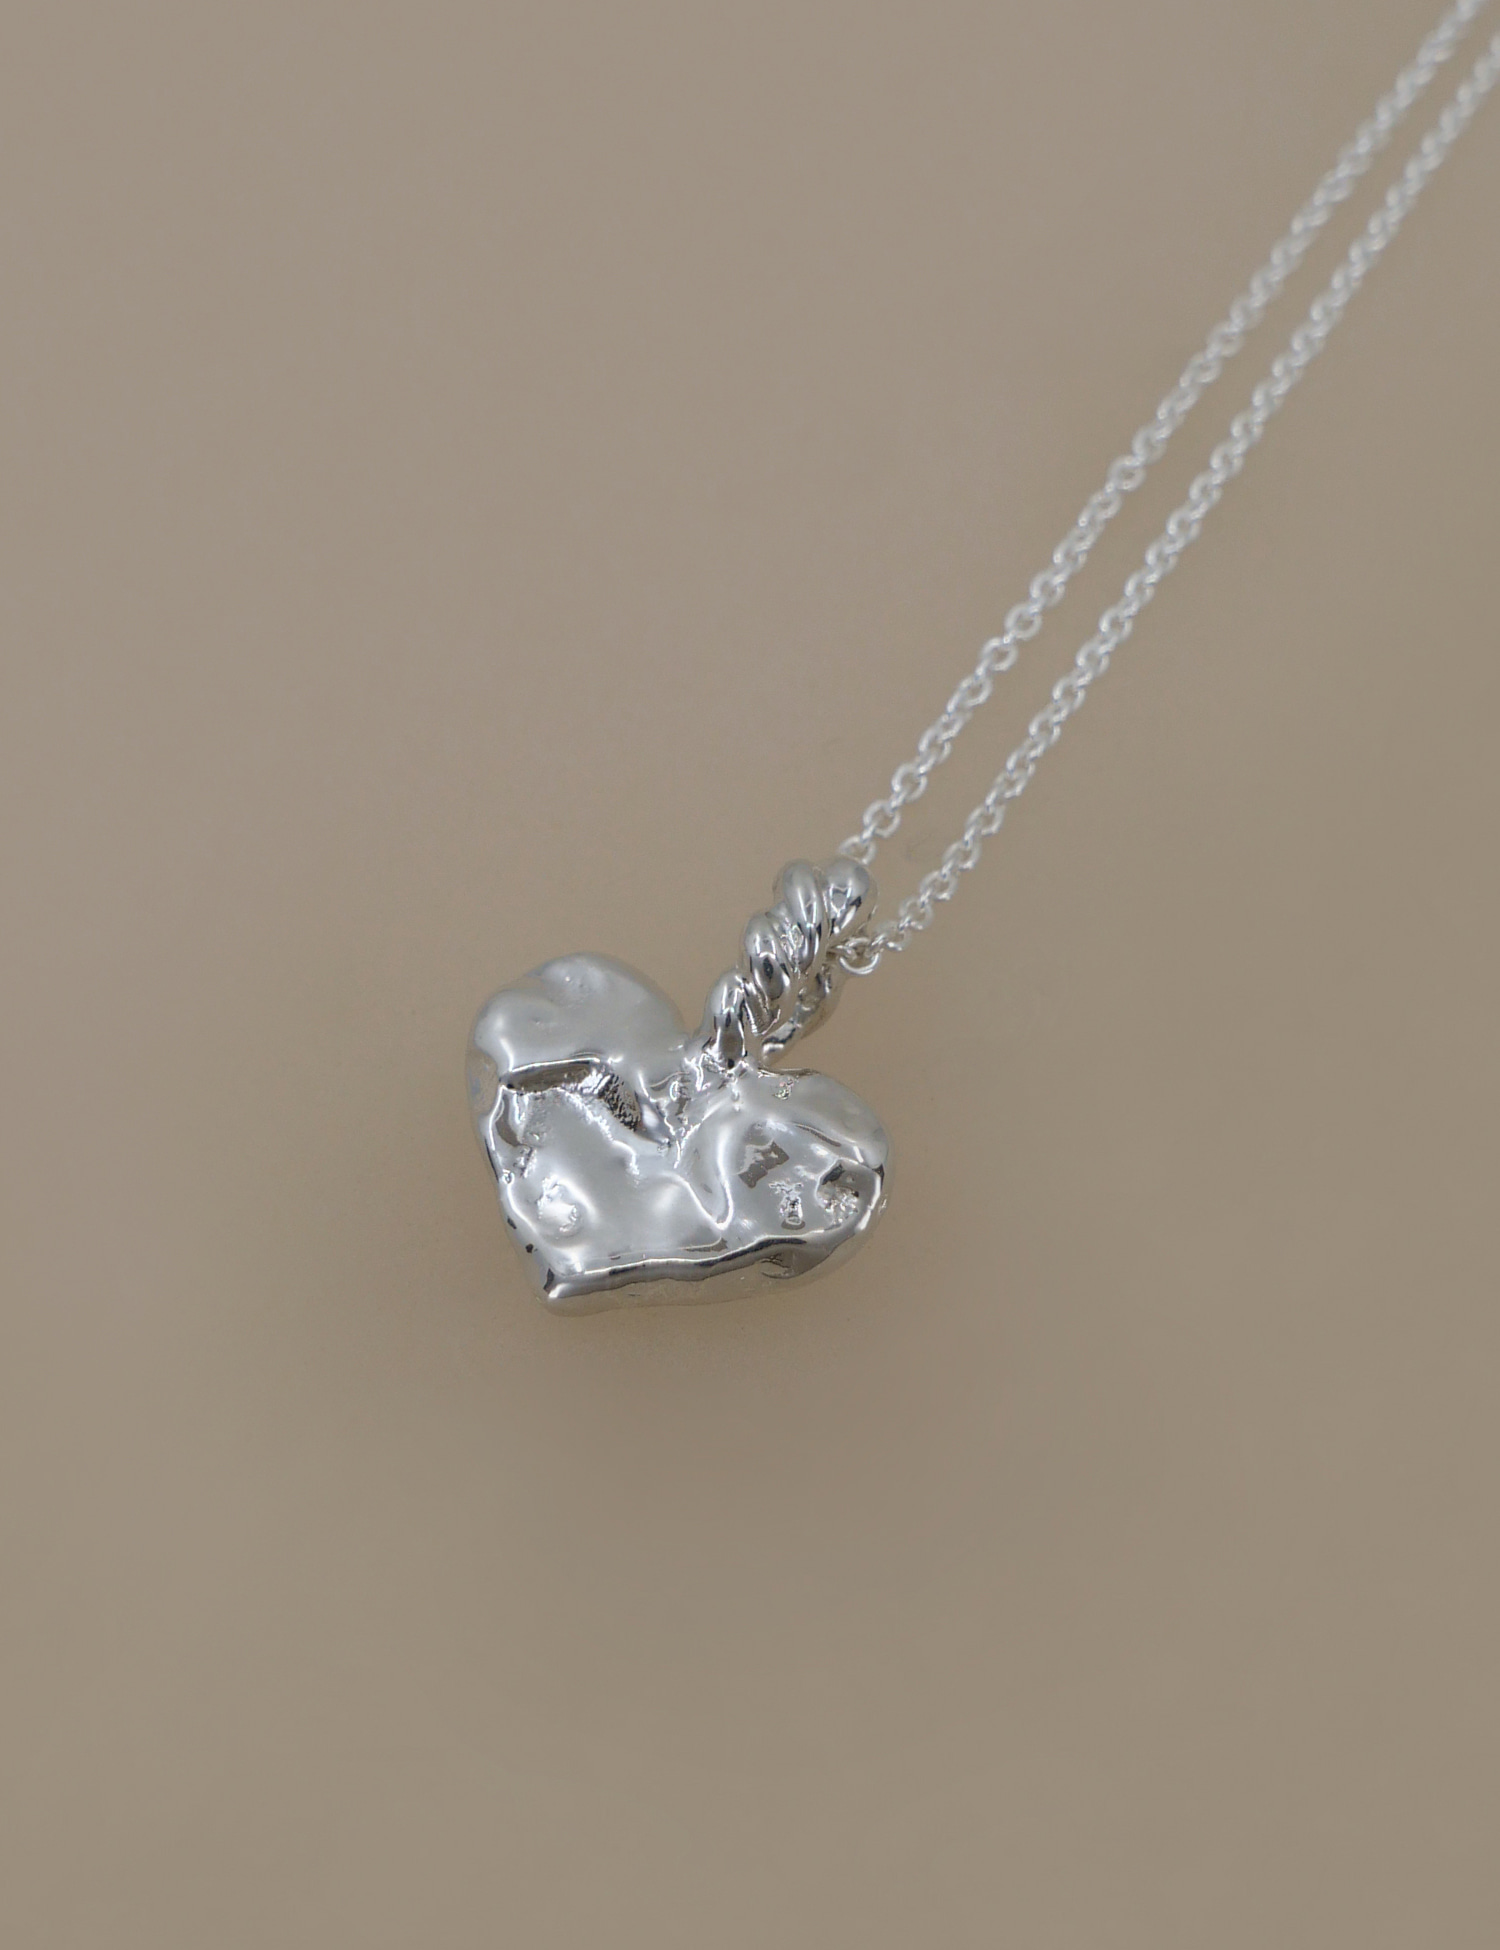 Textured Heart Necklace